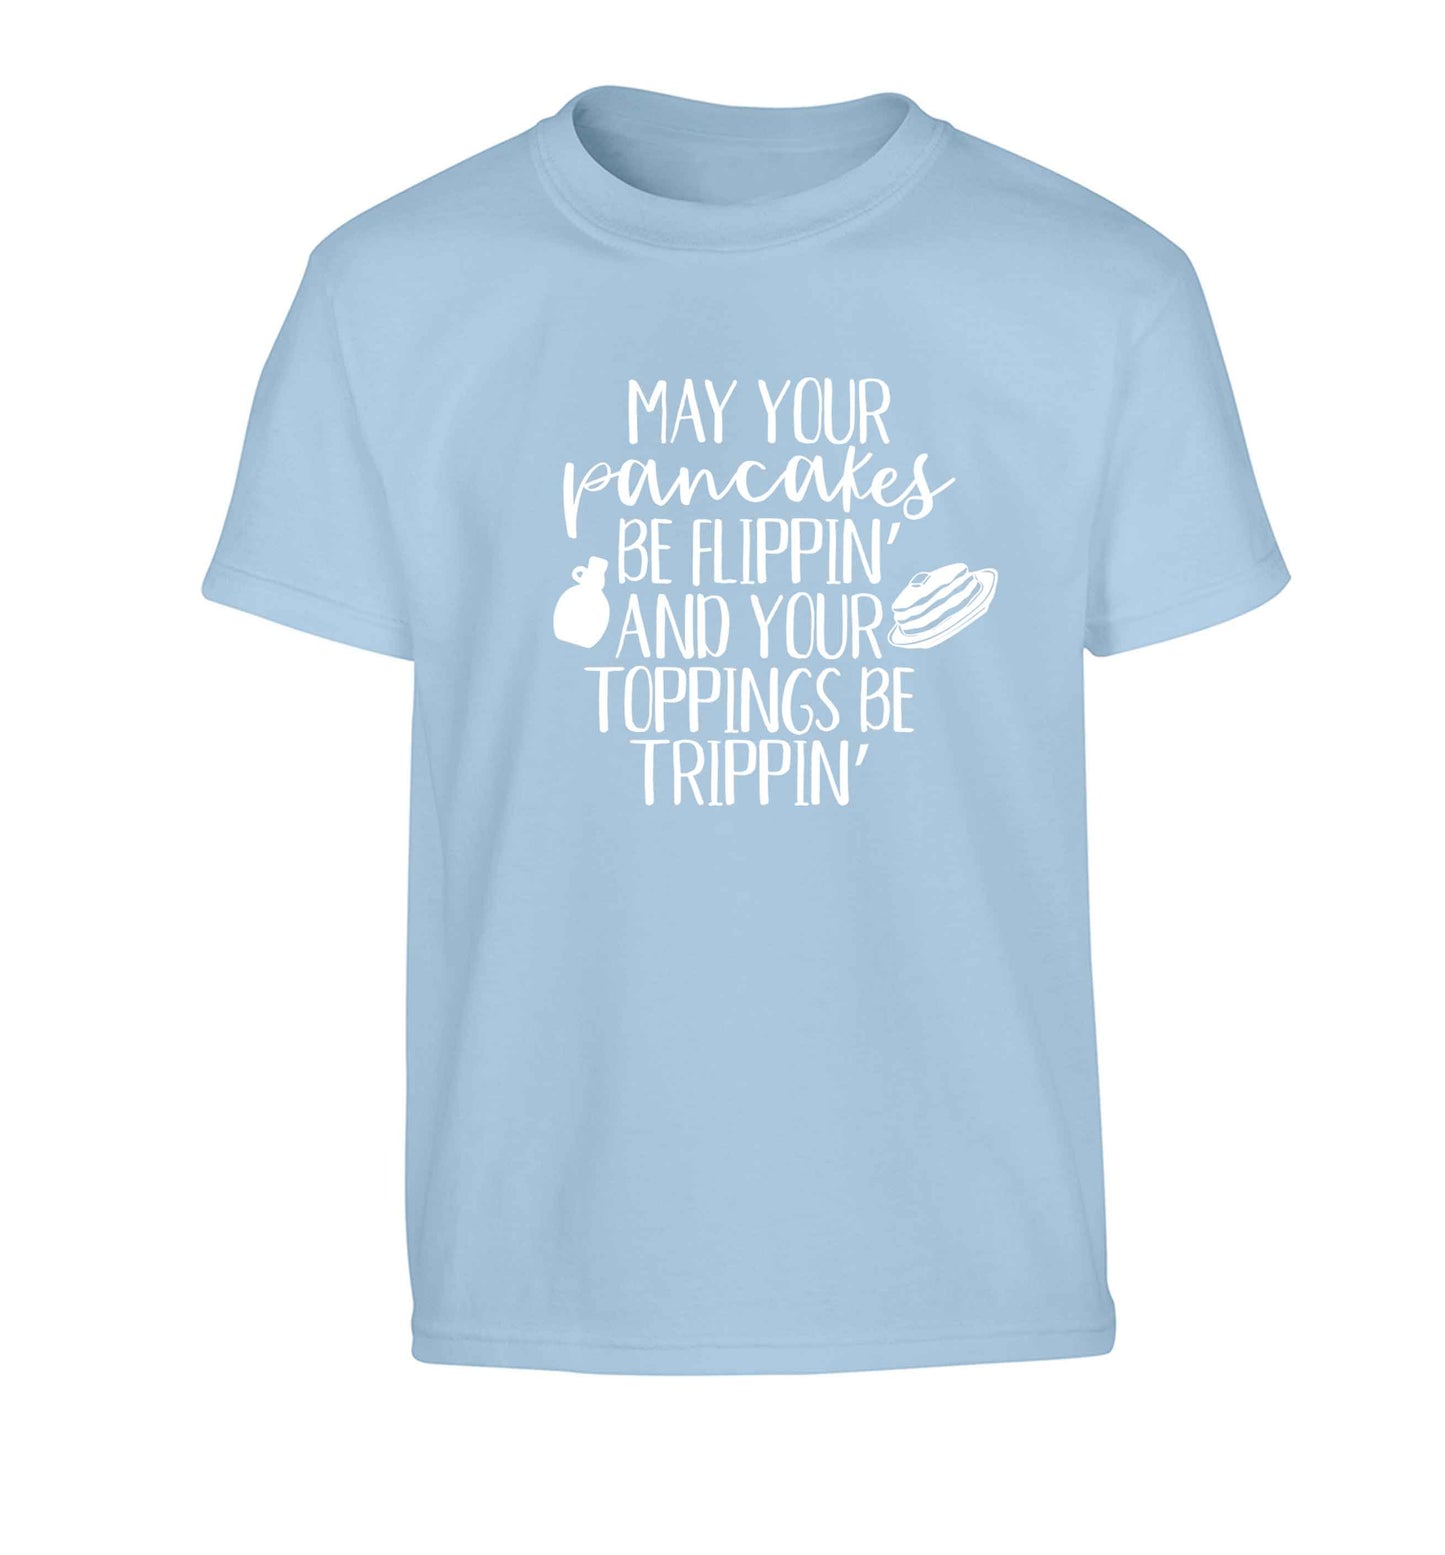 May your pancakes be flippin' and your toppings be trippin' Children's light blue Tshirt 12-13 Years